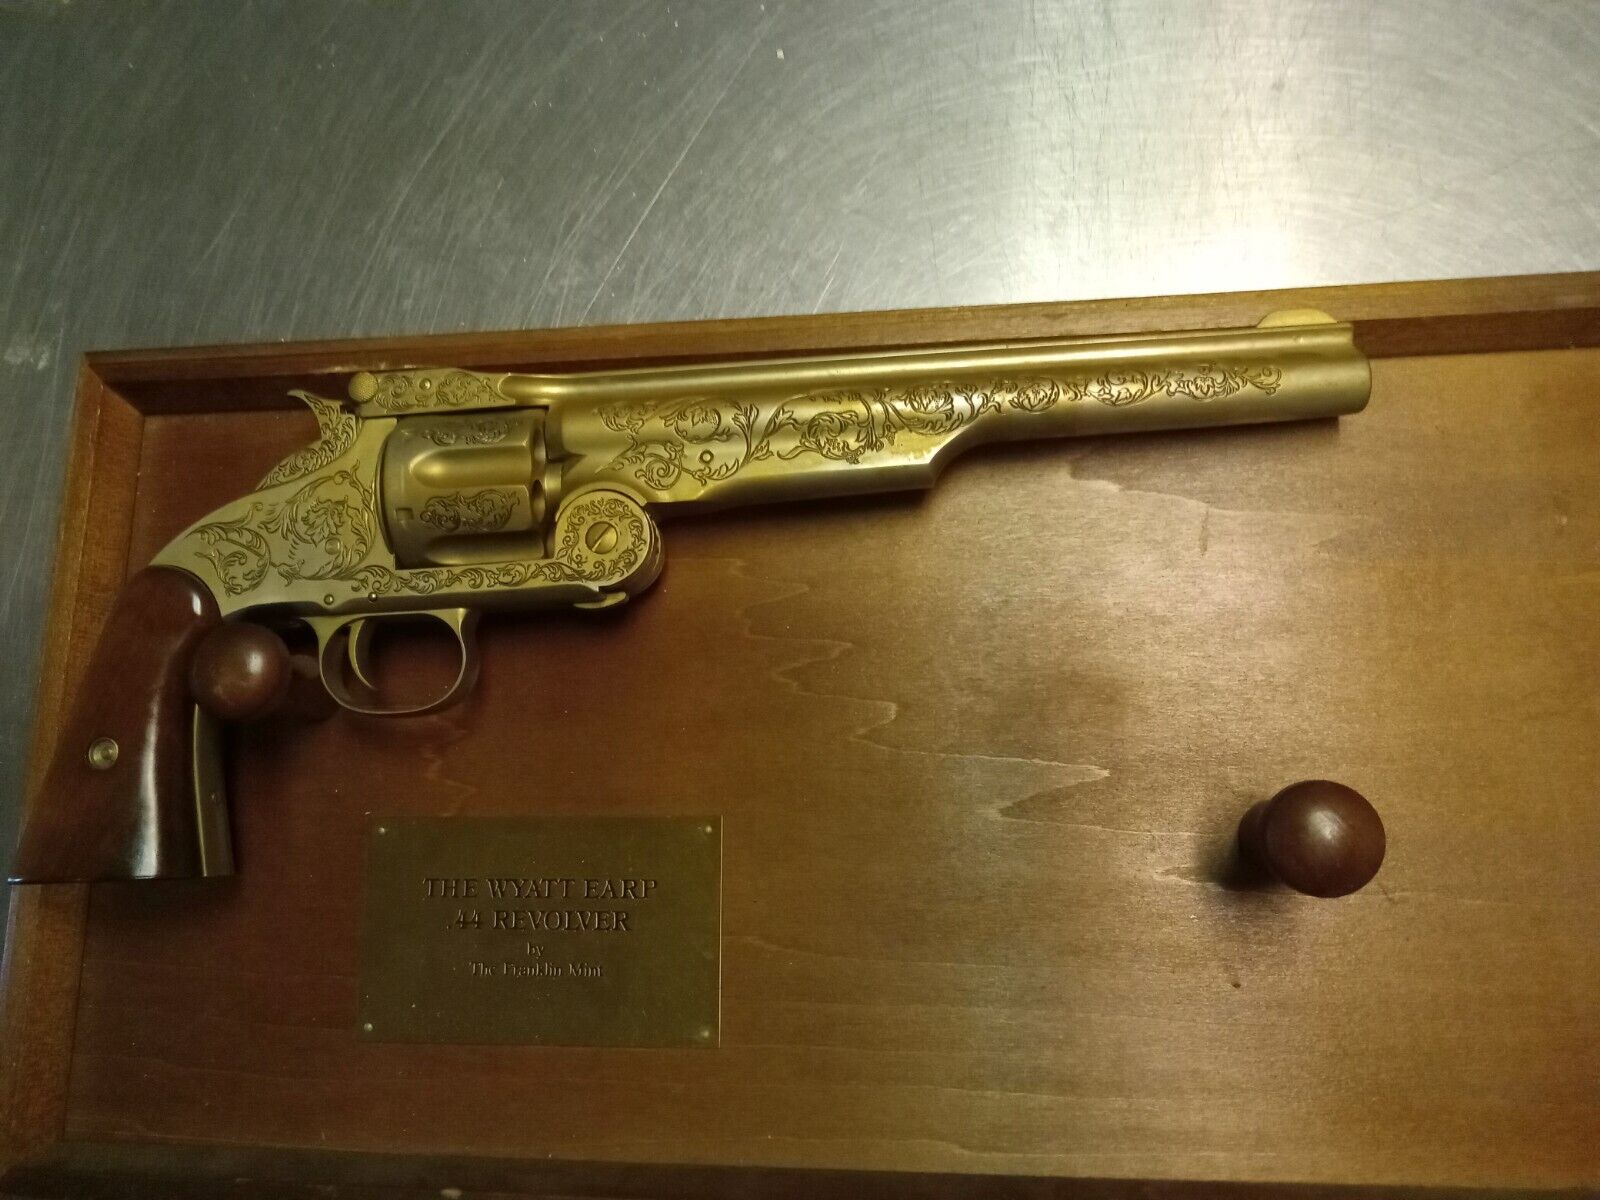 The Wyatt Earp 44 Revolver by The Franklin Mint With Display Board Non-Firing